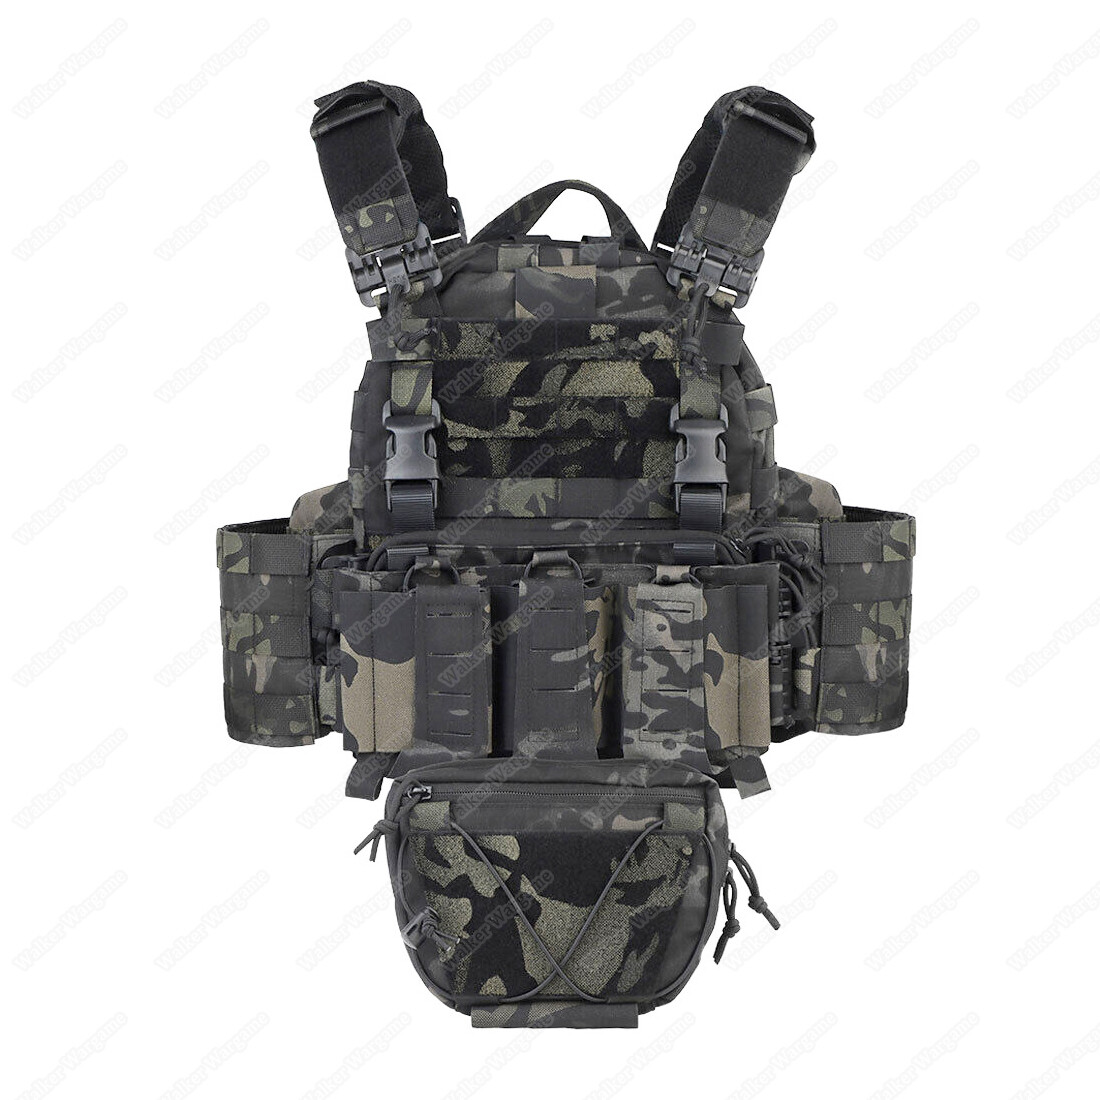 WST ARC Tactical Molle Vest With Belly Pouch -Multicam Black